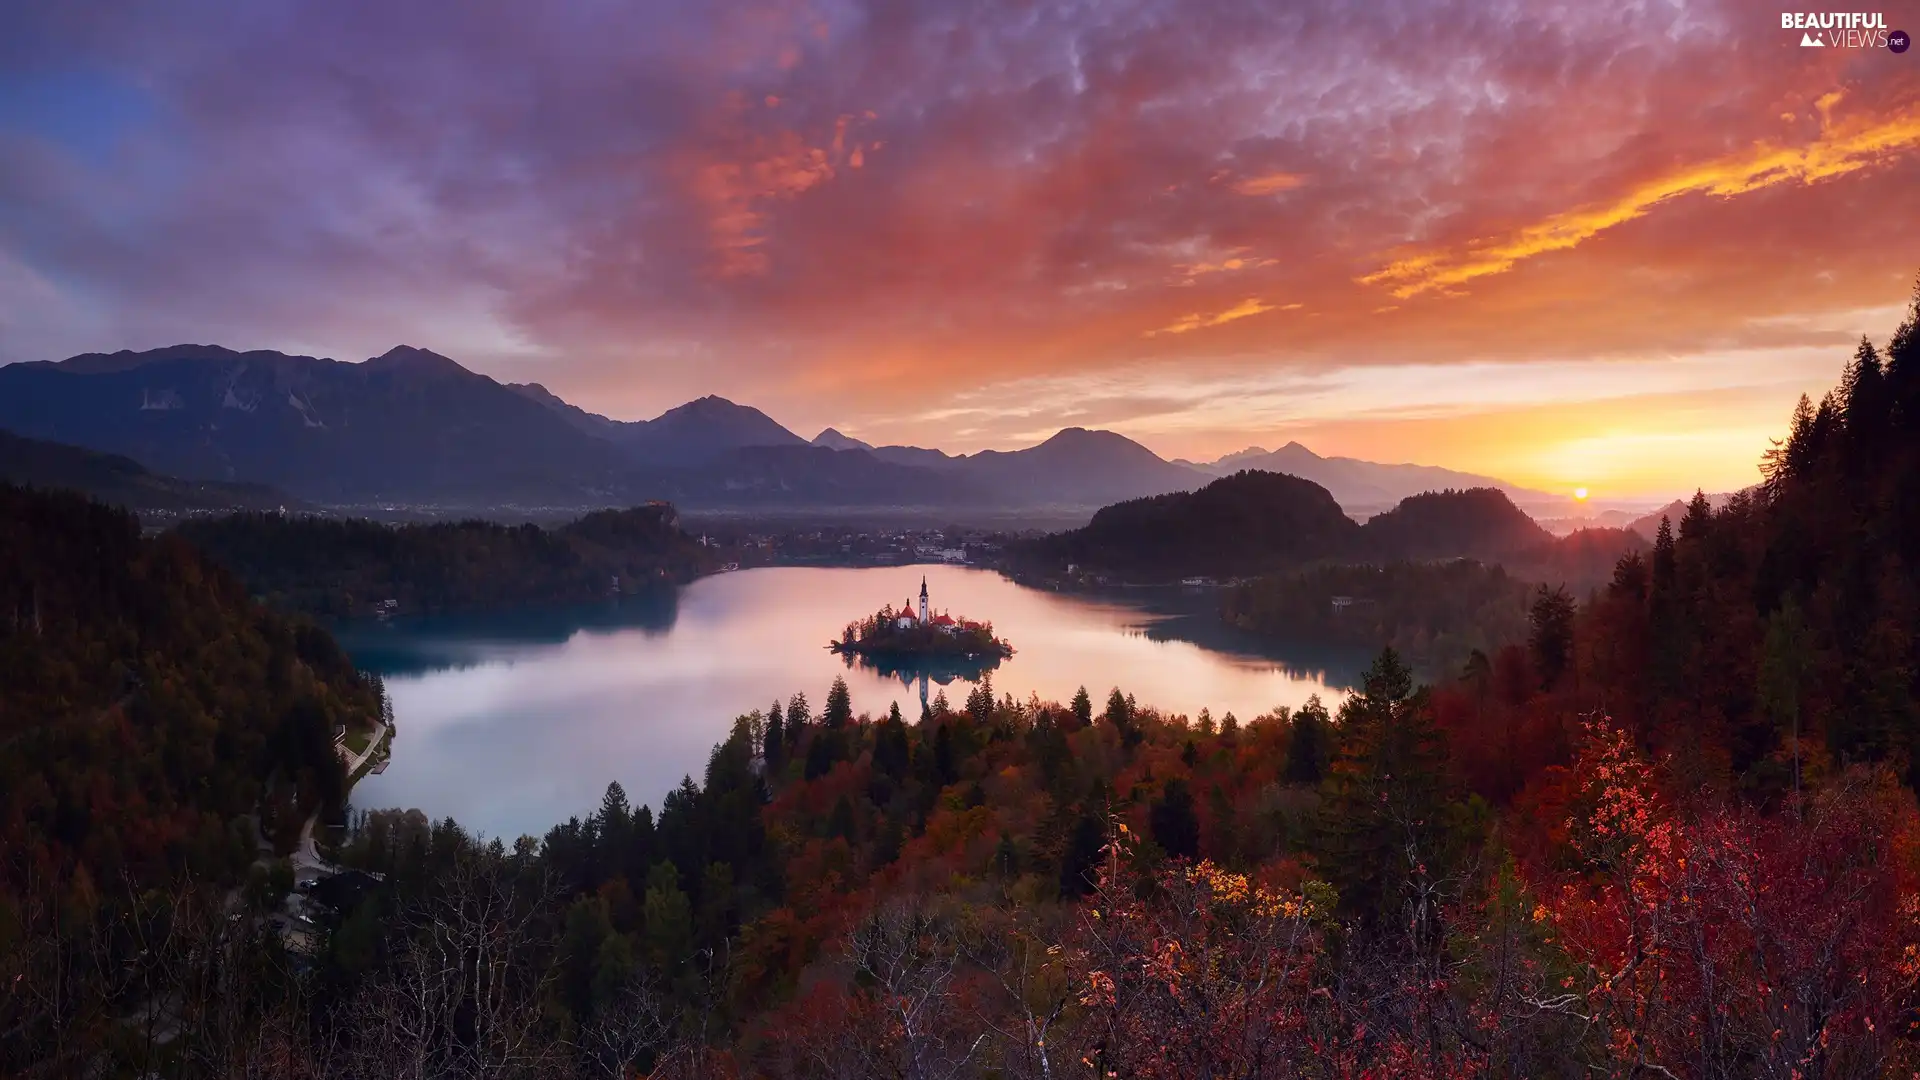 Lake Bled, Blejski Otok Island, Church of the Assumption of the Virgin Mary, Mountains, Great Sunsets, Slovenia, viewes, clouds, trees